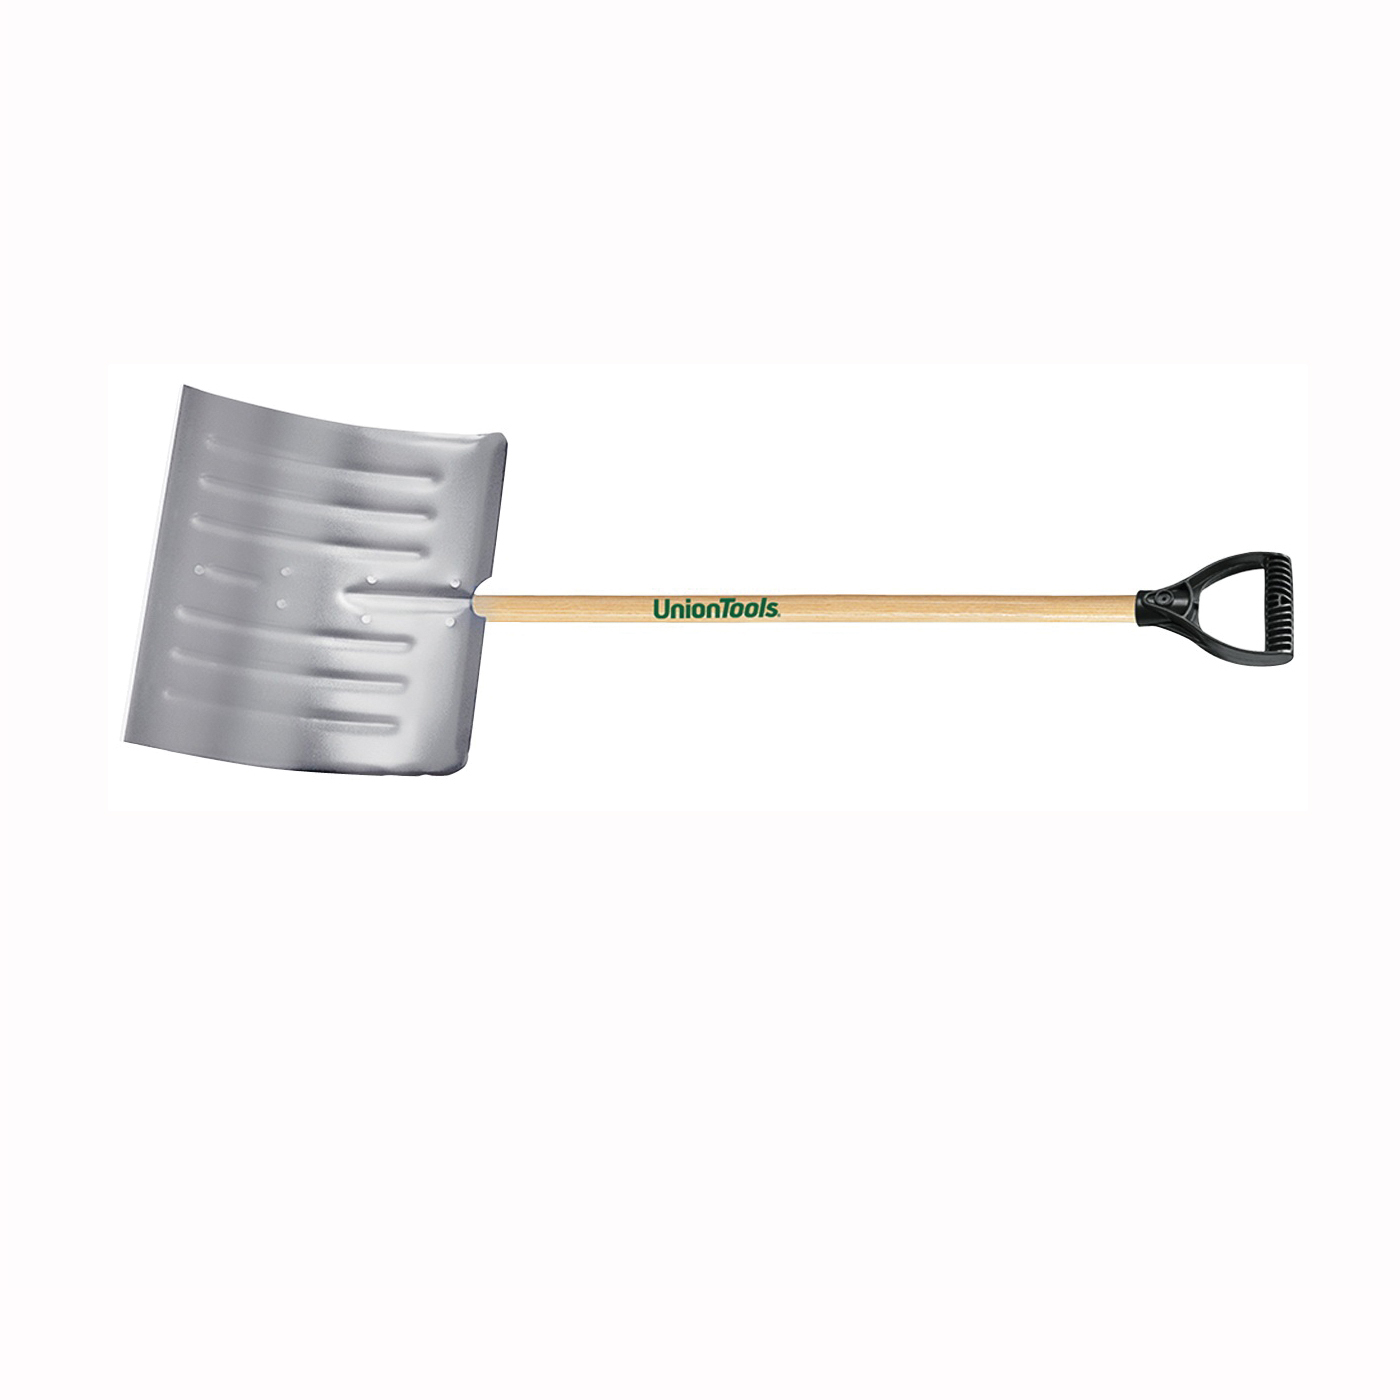 UnionTools 1640400 Snow Shovel, 18 in W Blade, 14-1/2 in L Blade, Aluminum Blade, Wood Handle, 51 in OAL - 1